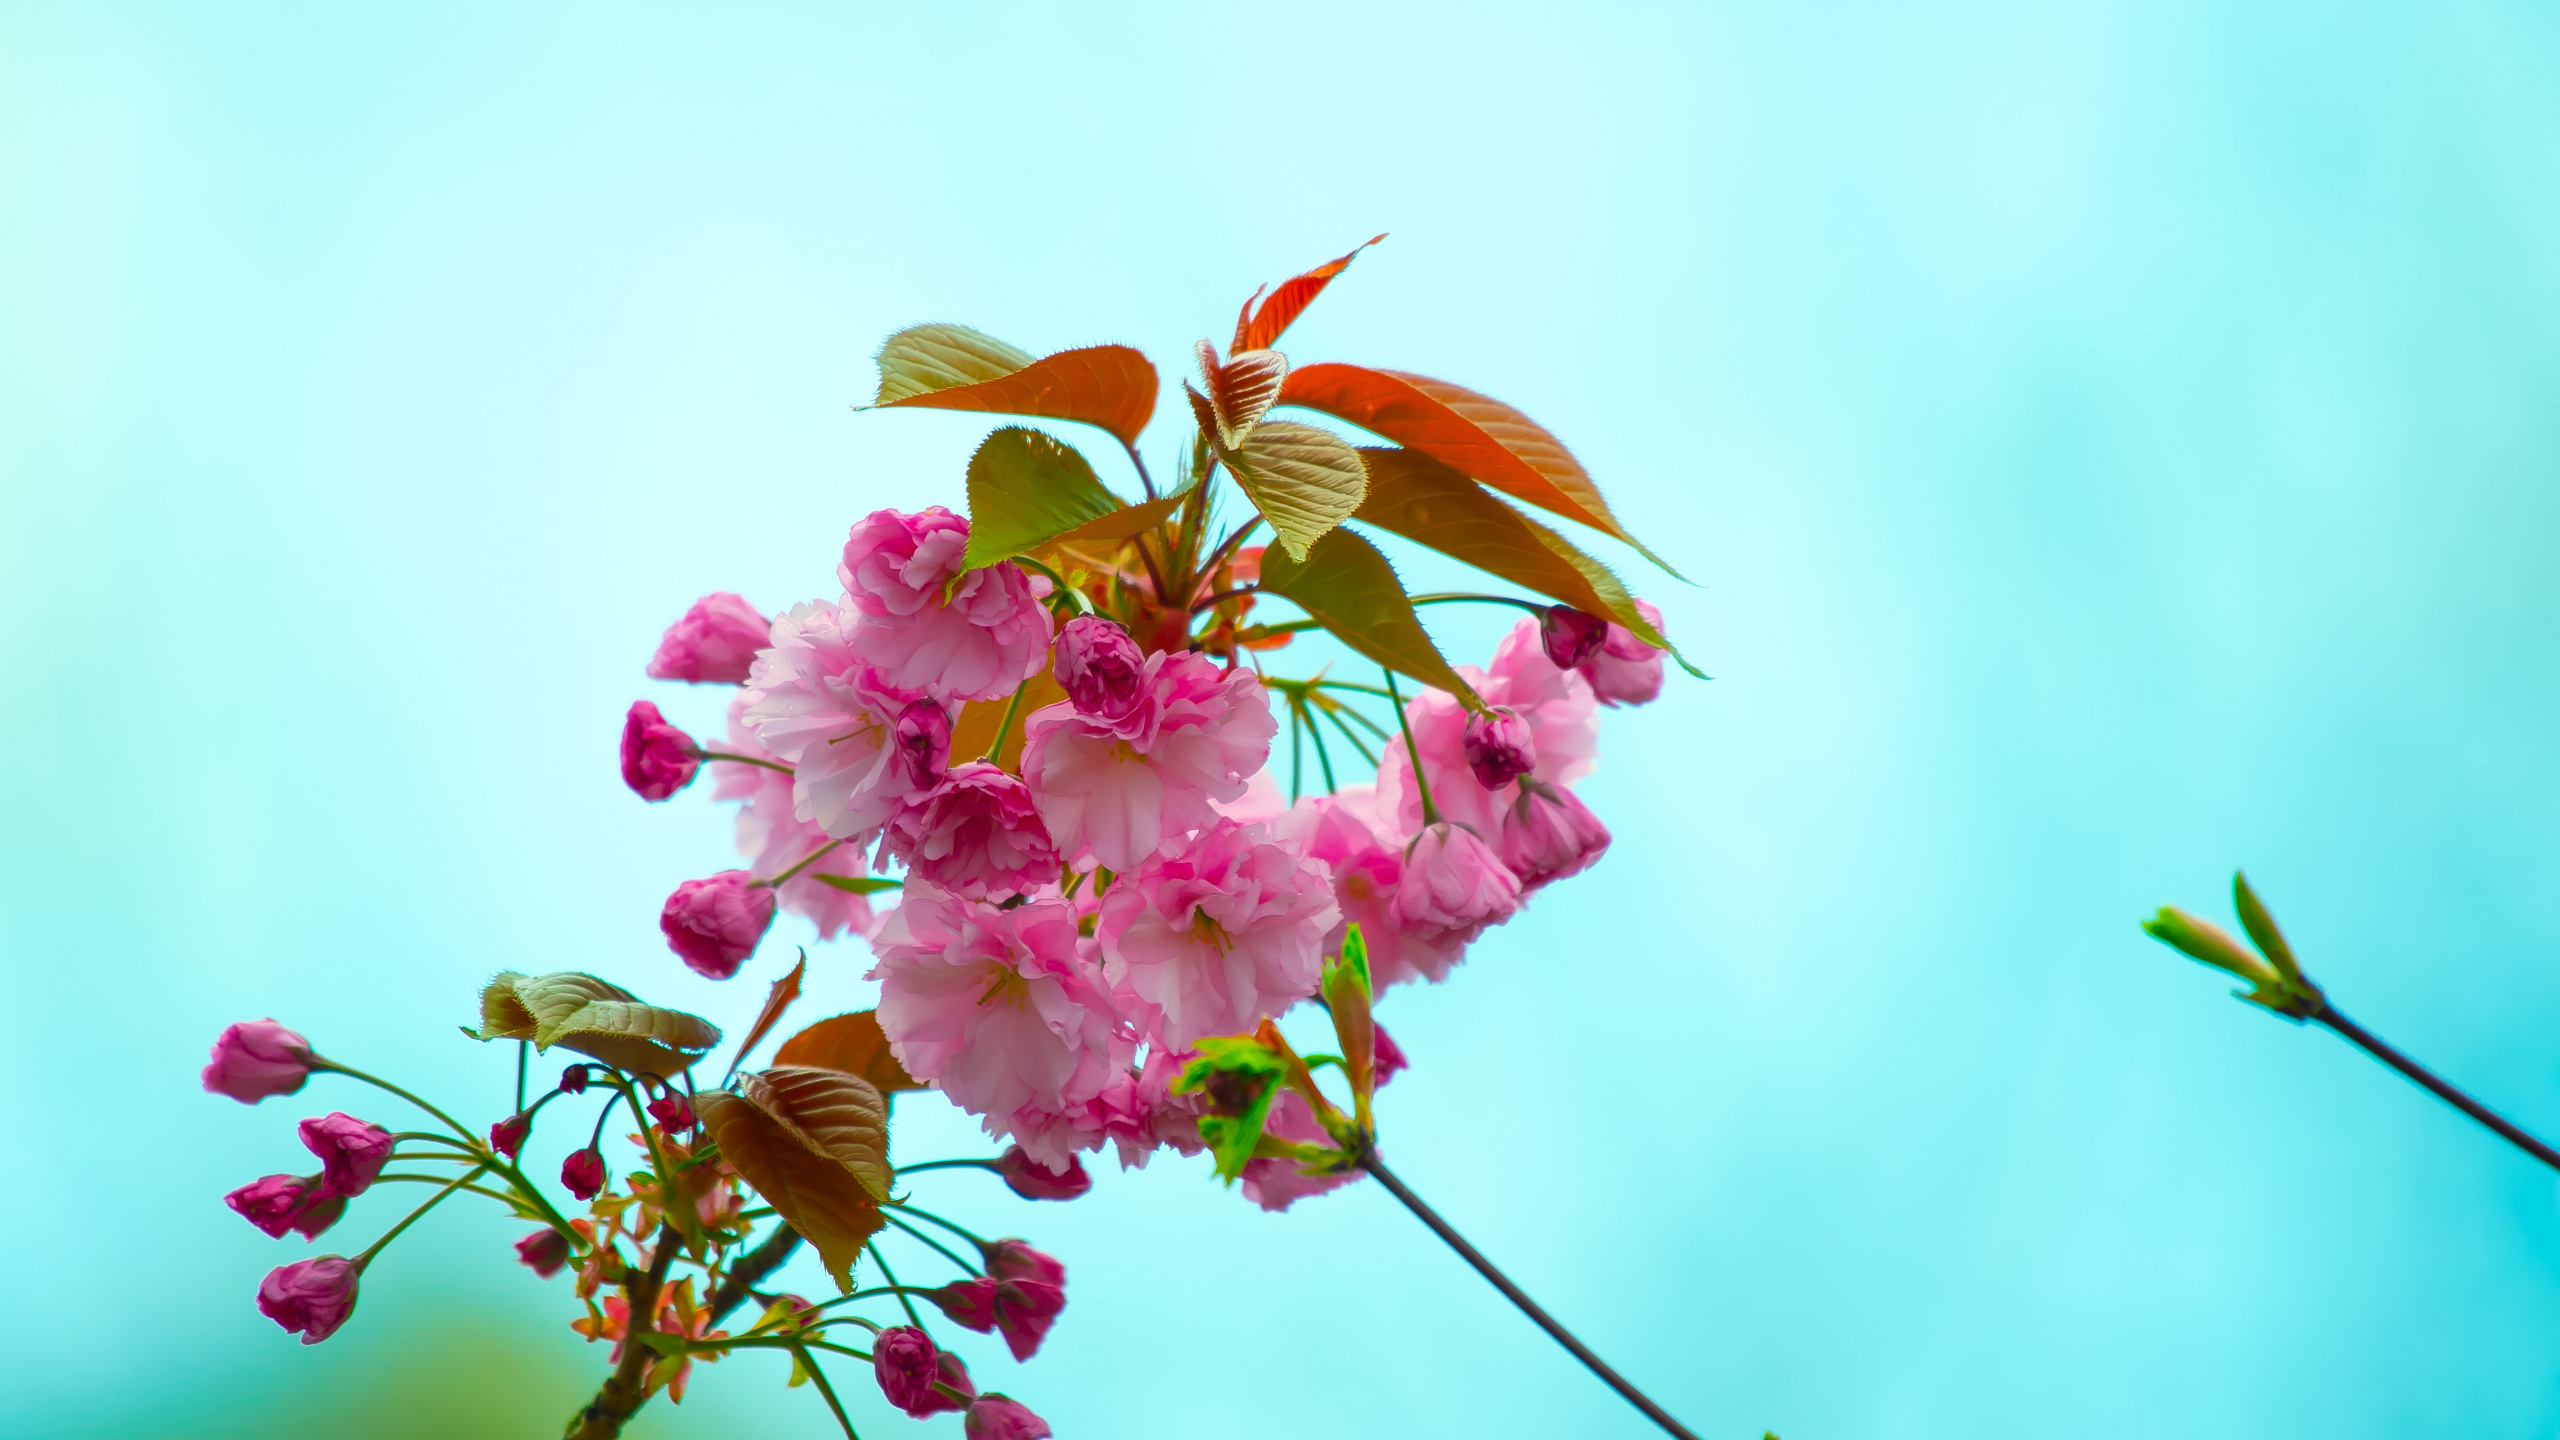 Pink Flower With Green Leaves. Wallpaper in 2560x1440 Resolution